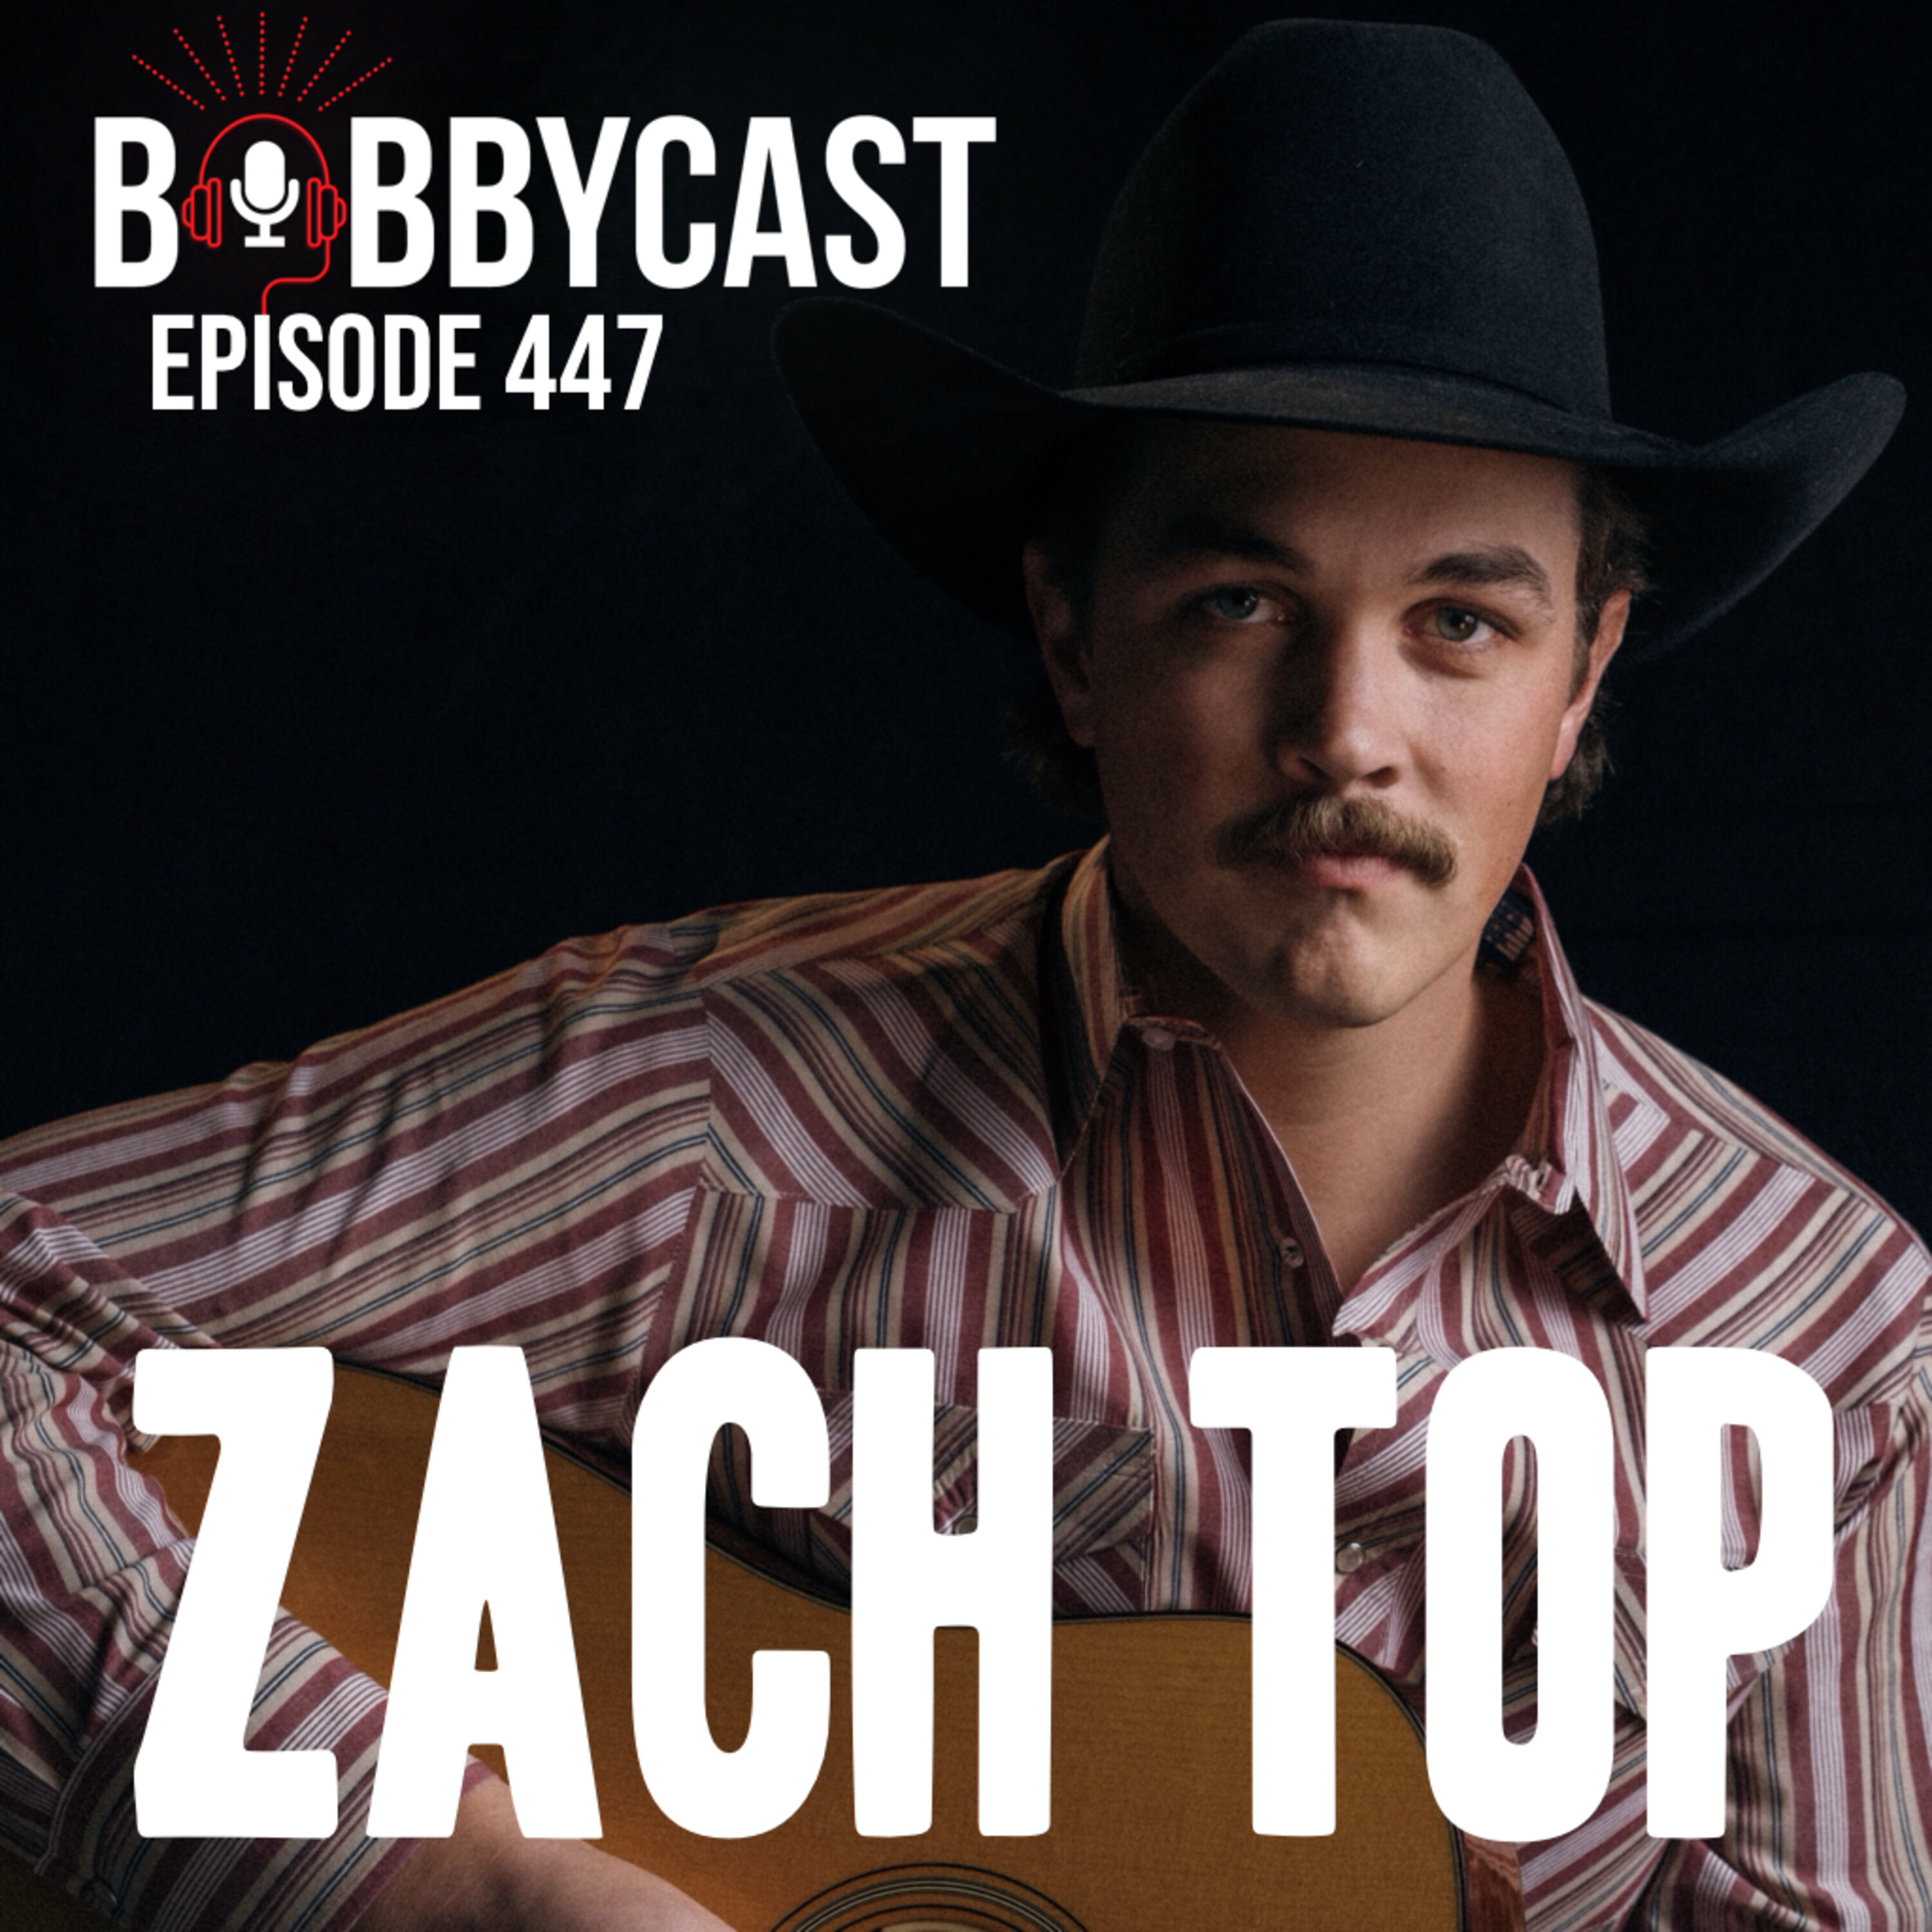 #447 - Zach Top on Jake Owen’s Support of His Music + Growing up Homeschooled and Playing in Family Band + Booking His First at 7 Years Old Over the Phone